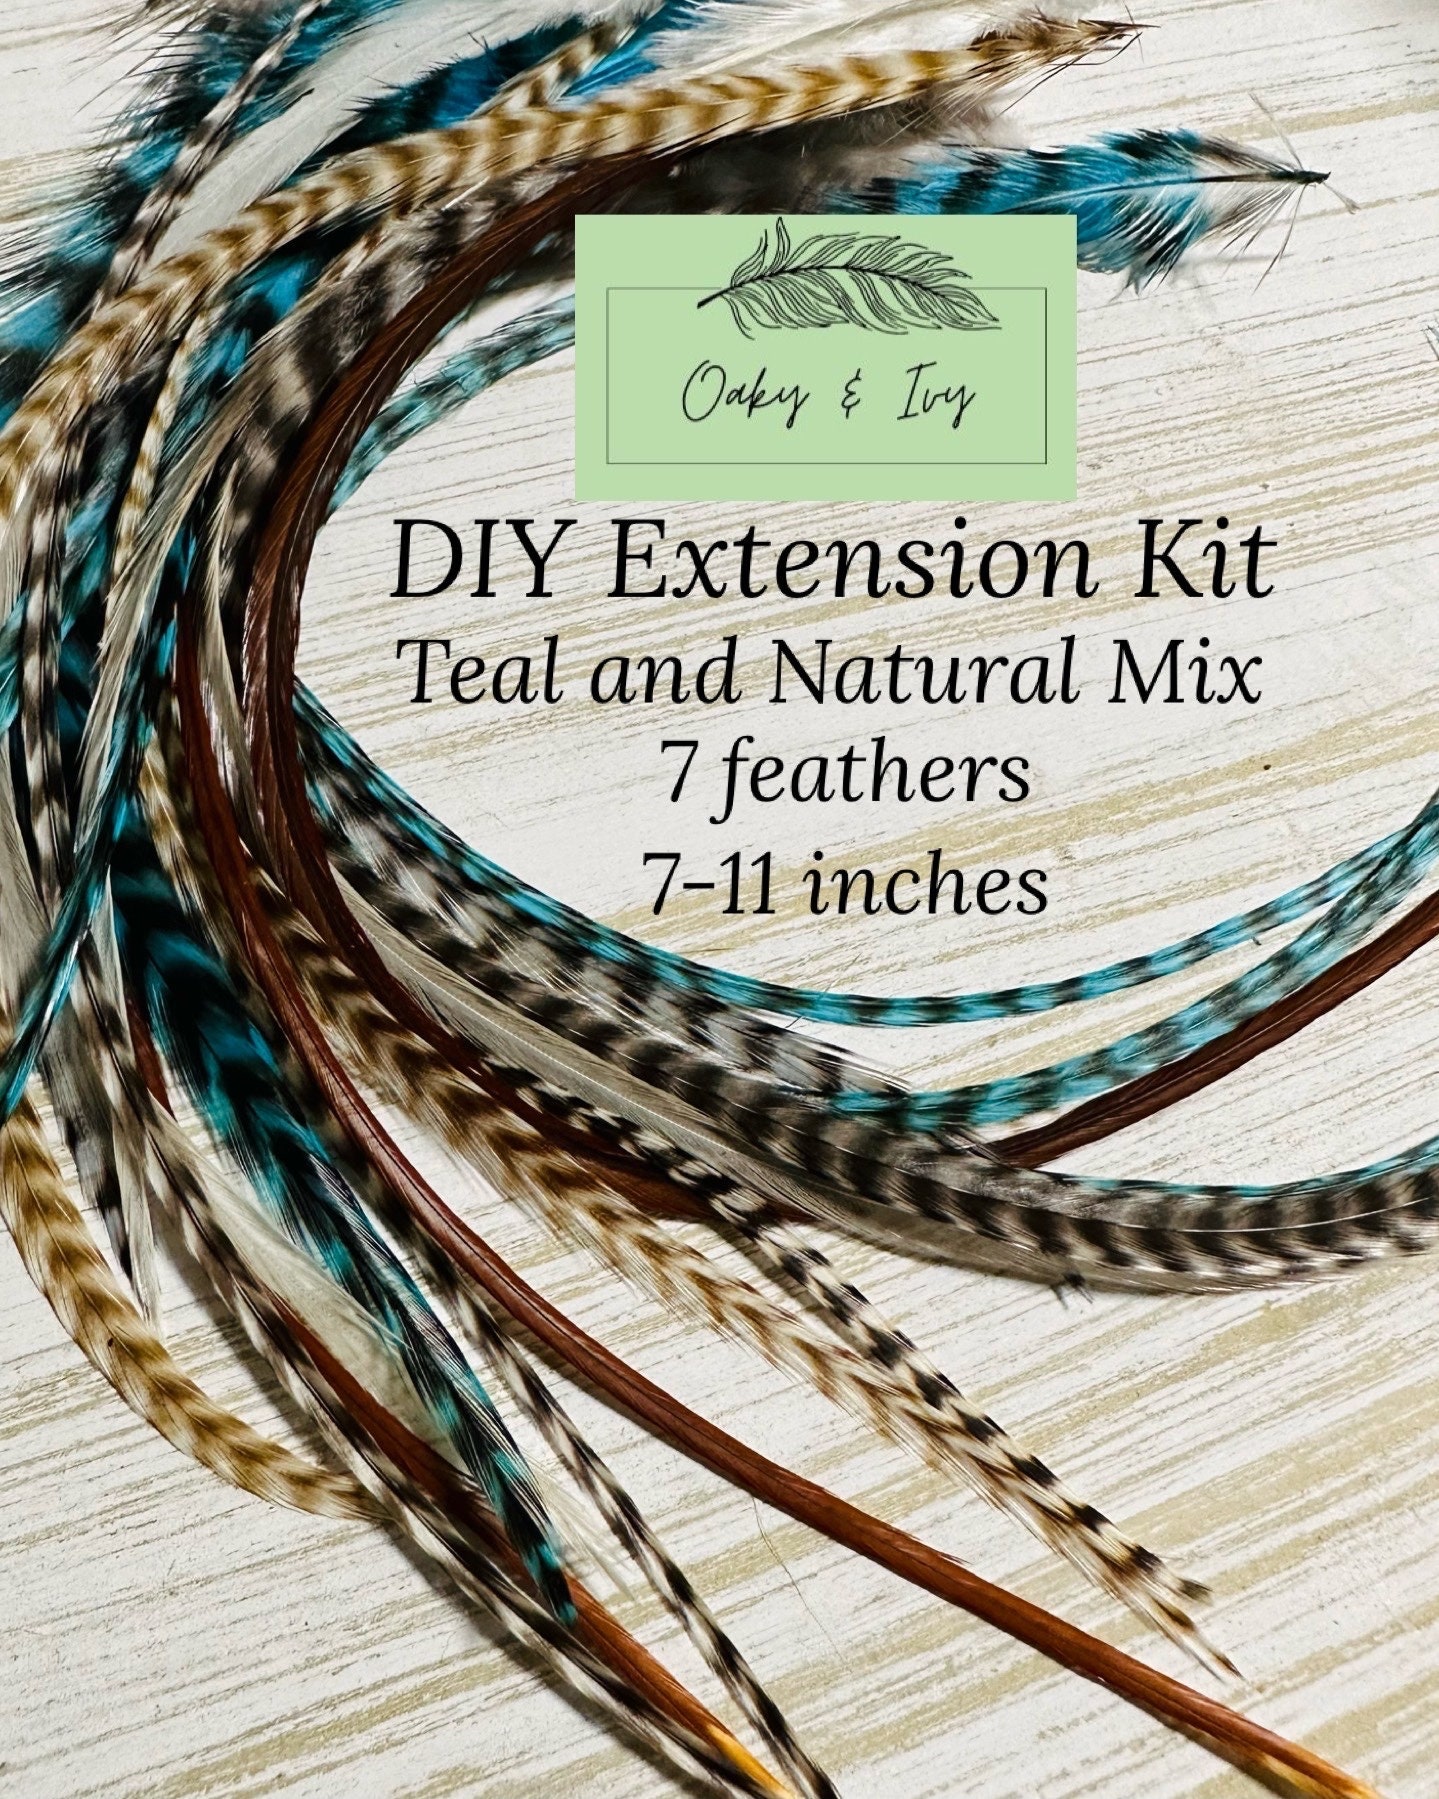 DIY Feather Hair Extensions – ShayFeathers